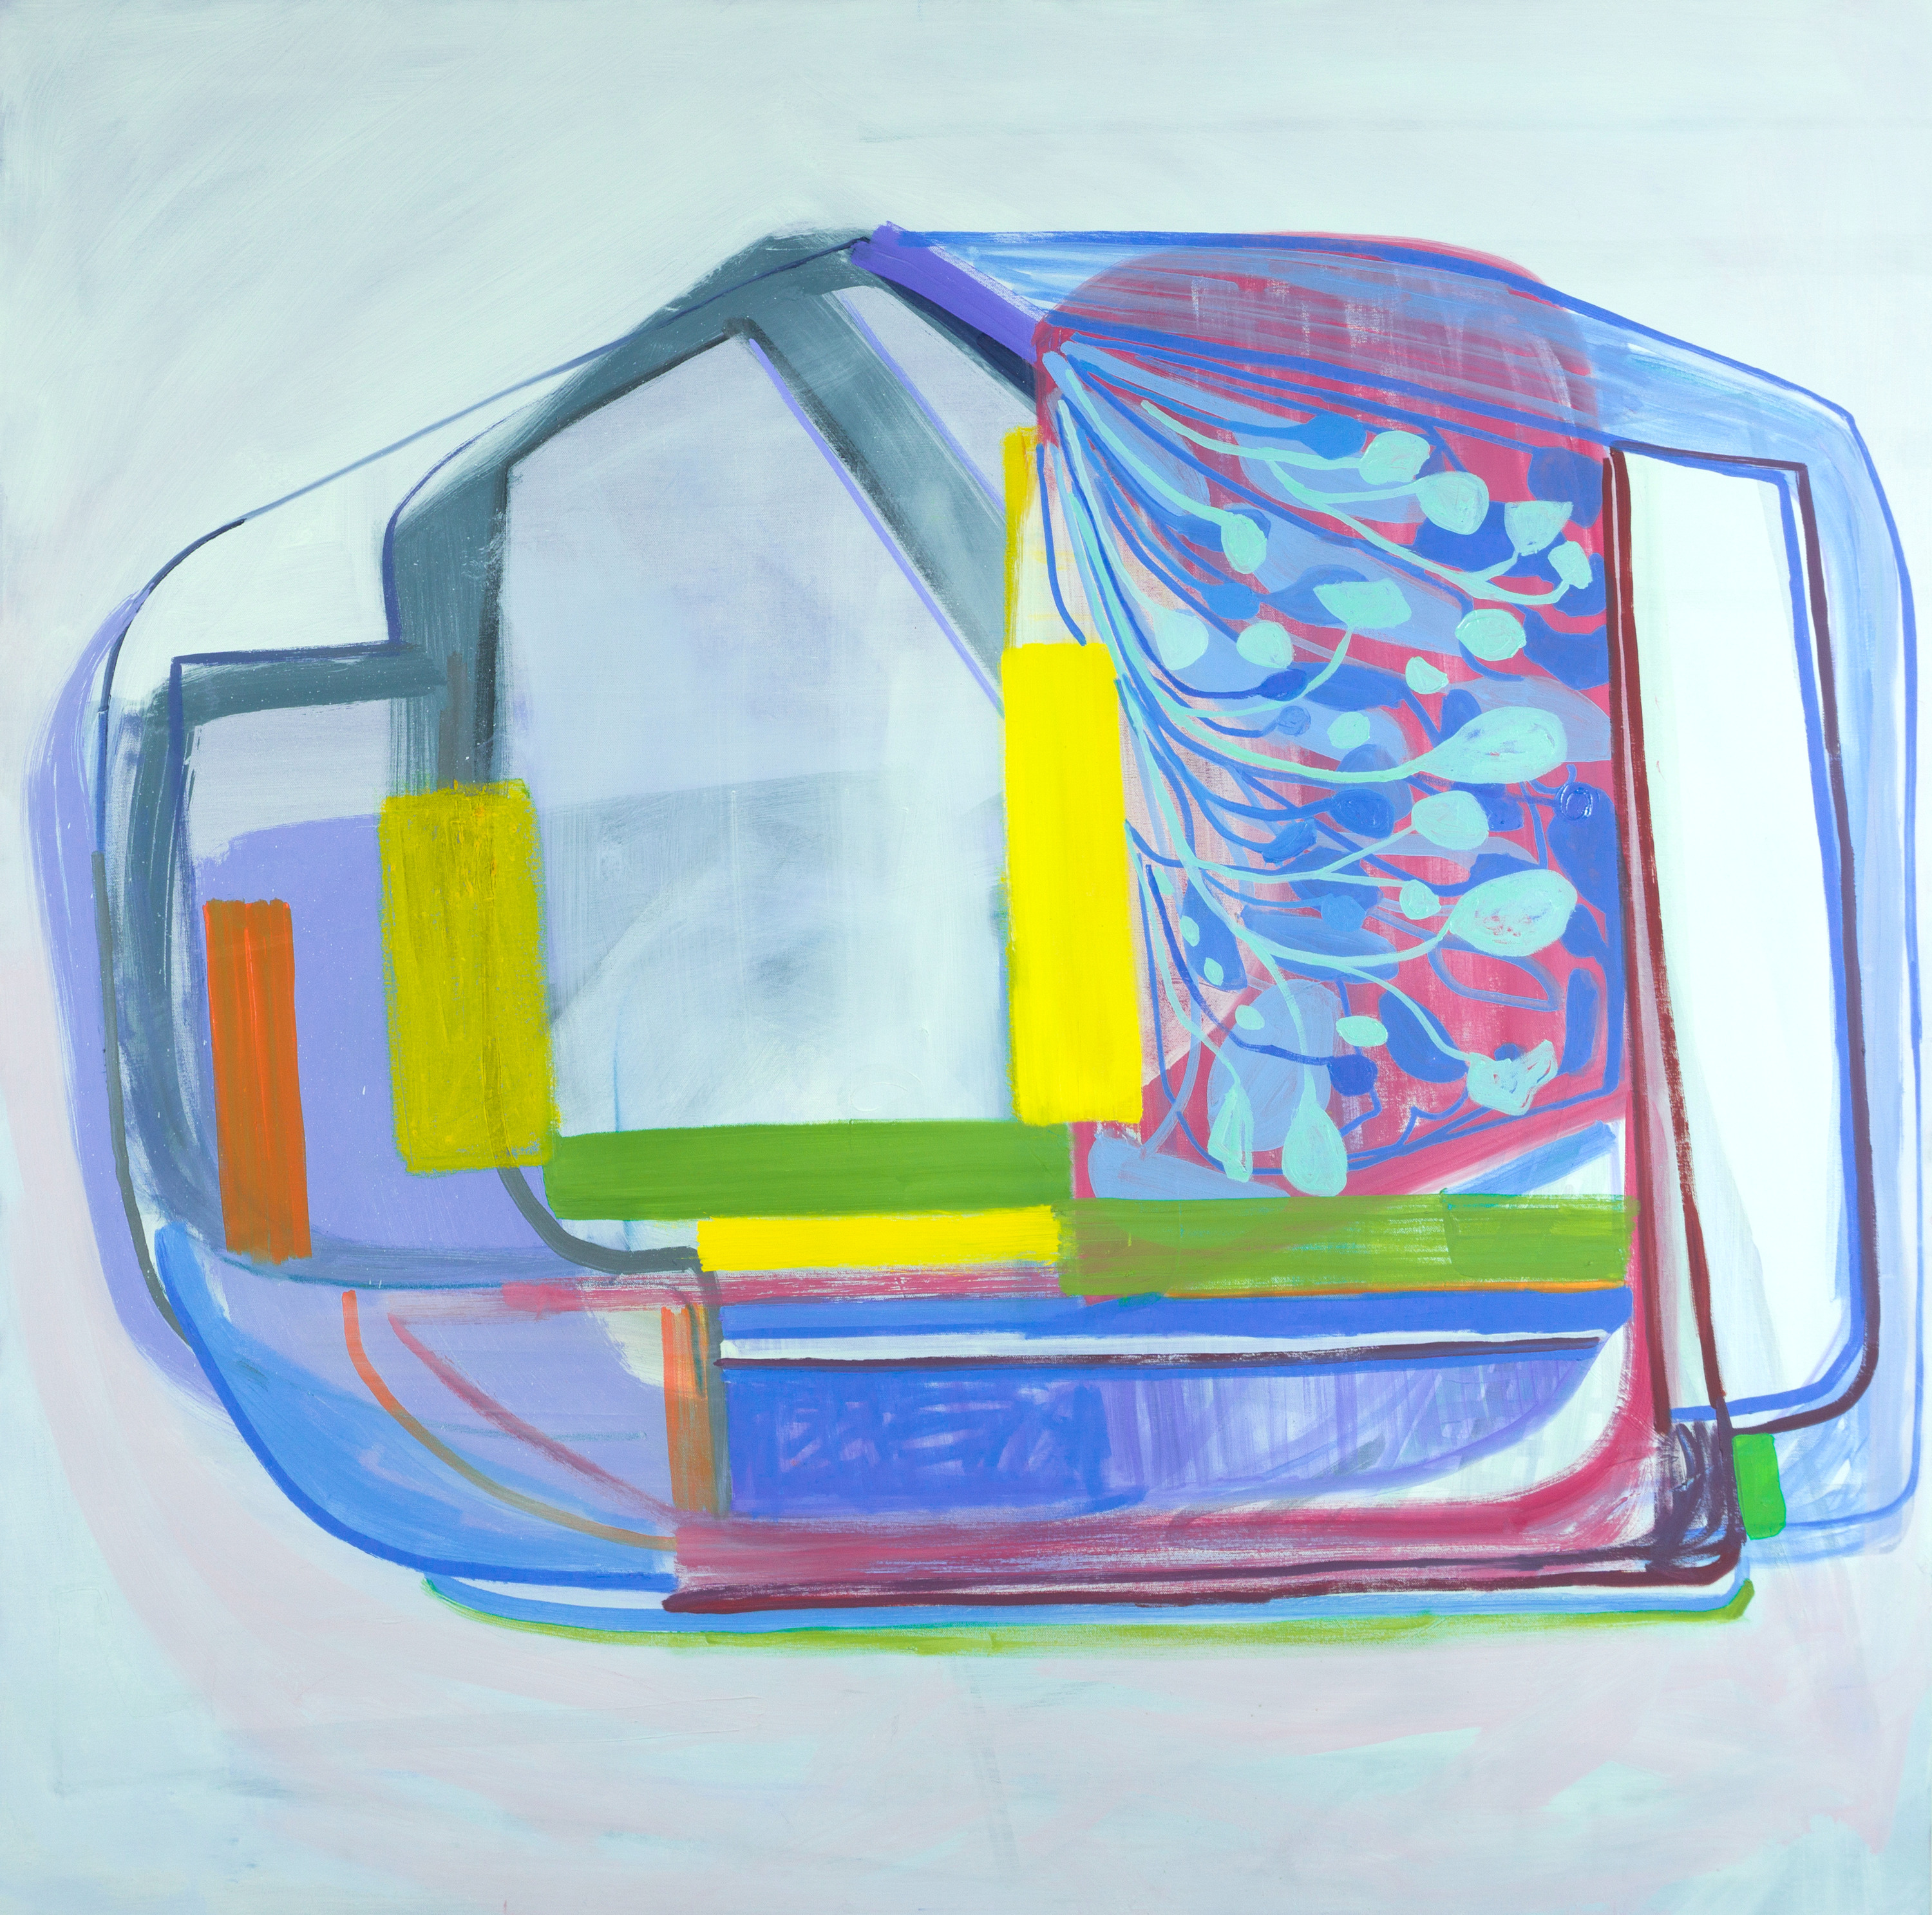 Snow mobile 2018 50 x 50 inches caley odwyer.jpg dsc0440 llg10k